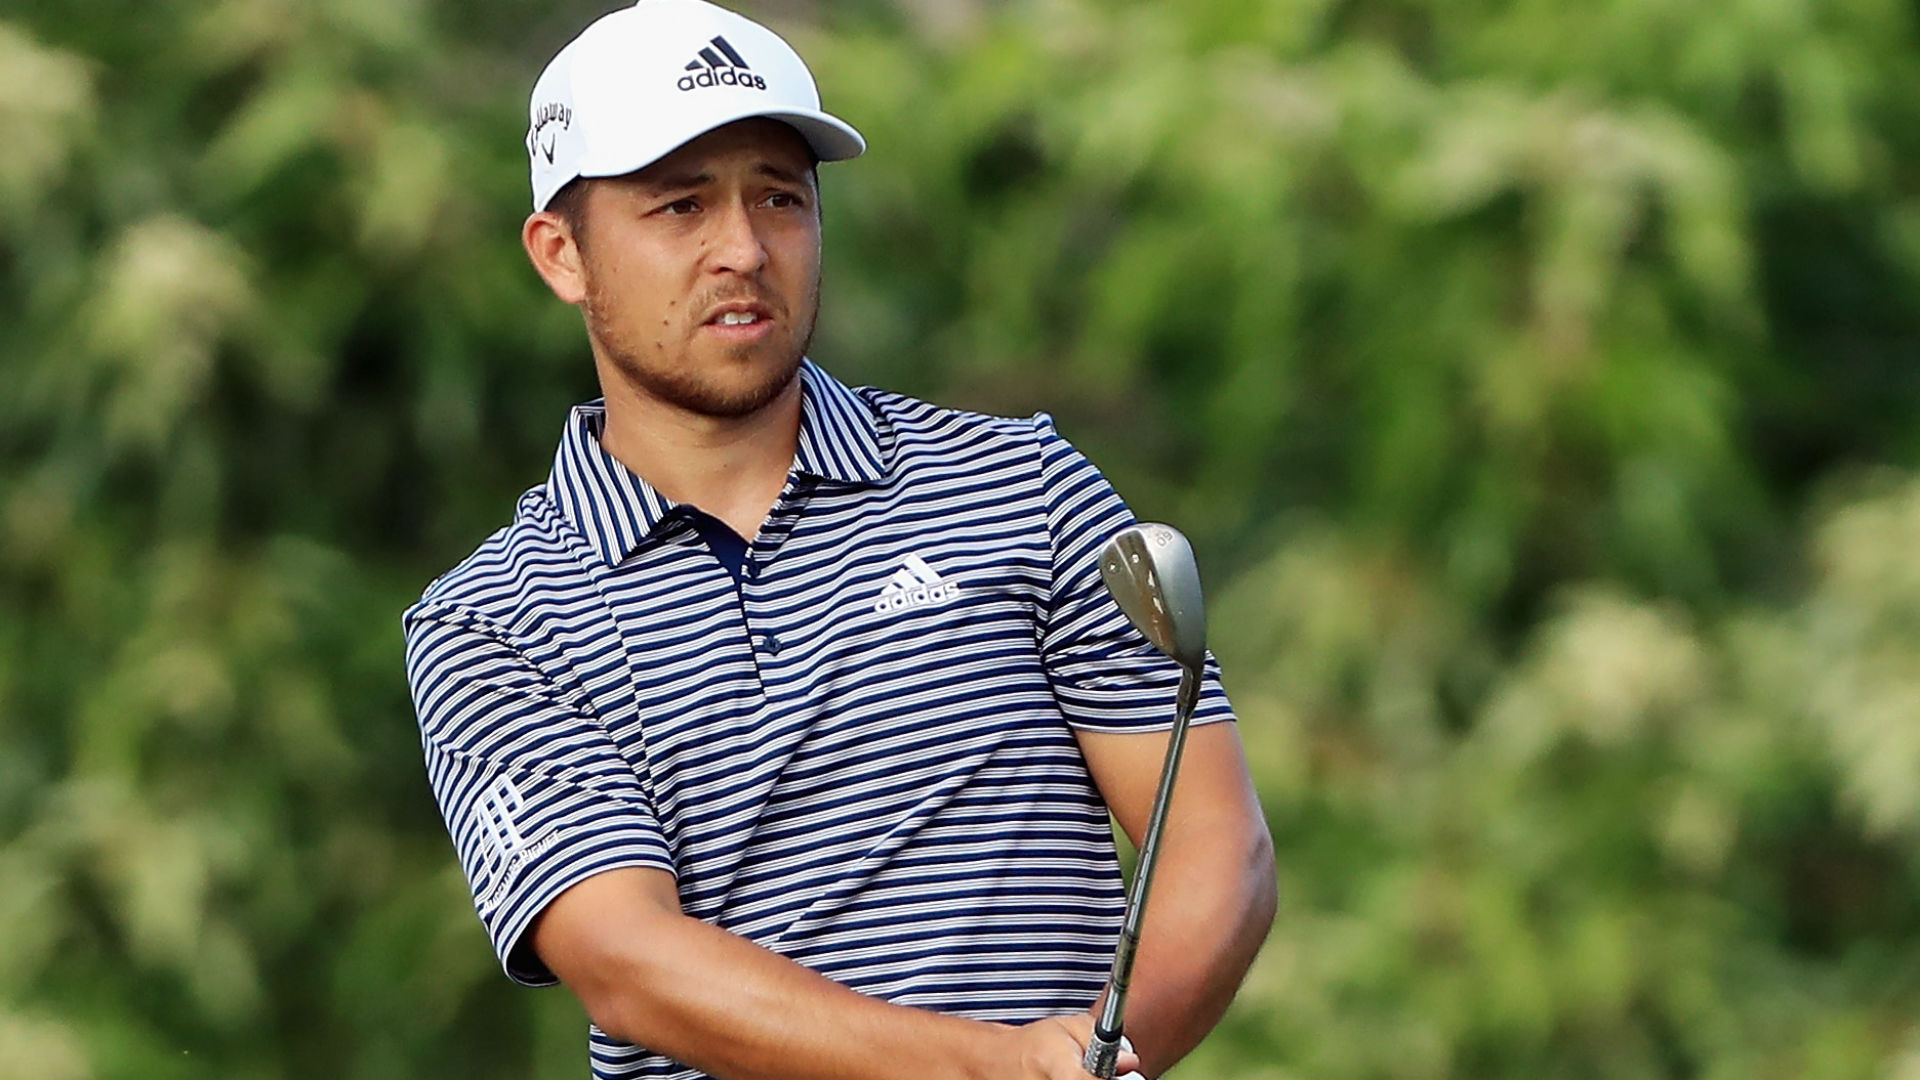 Schauffele Emerges On Moving Day At Charles Schwab